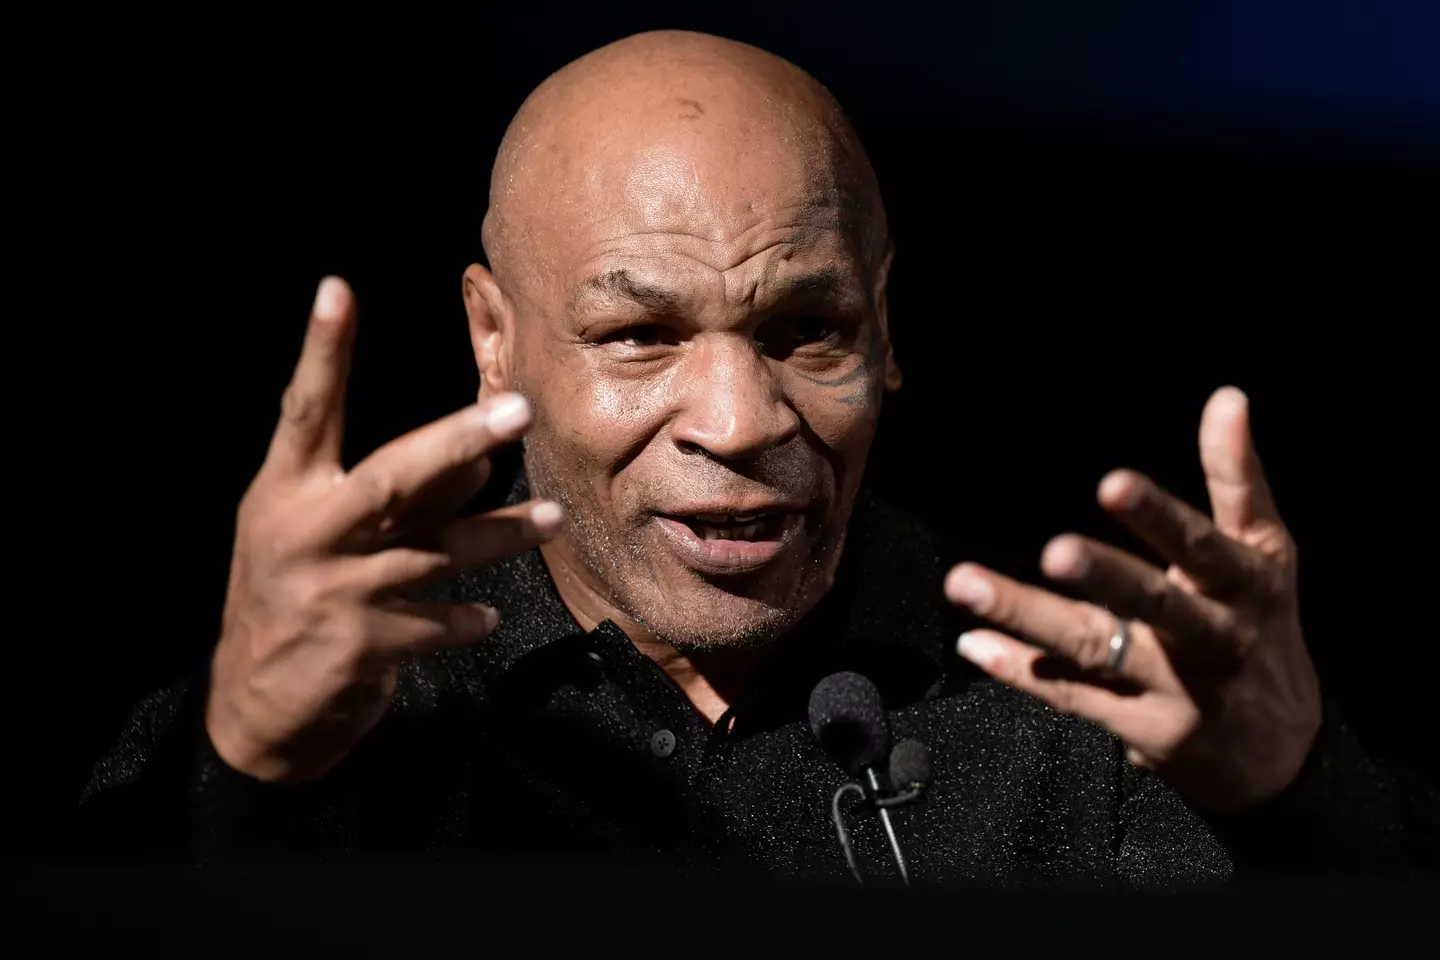 Mike Tyson returns to the rings later this summer. (Nicolò Campo/LightRocket via Getty Images)